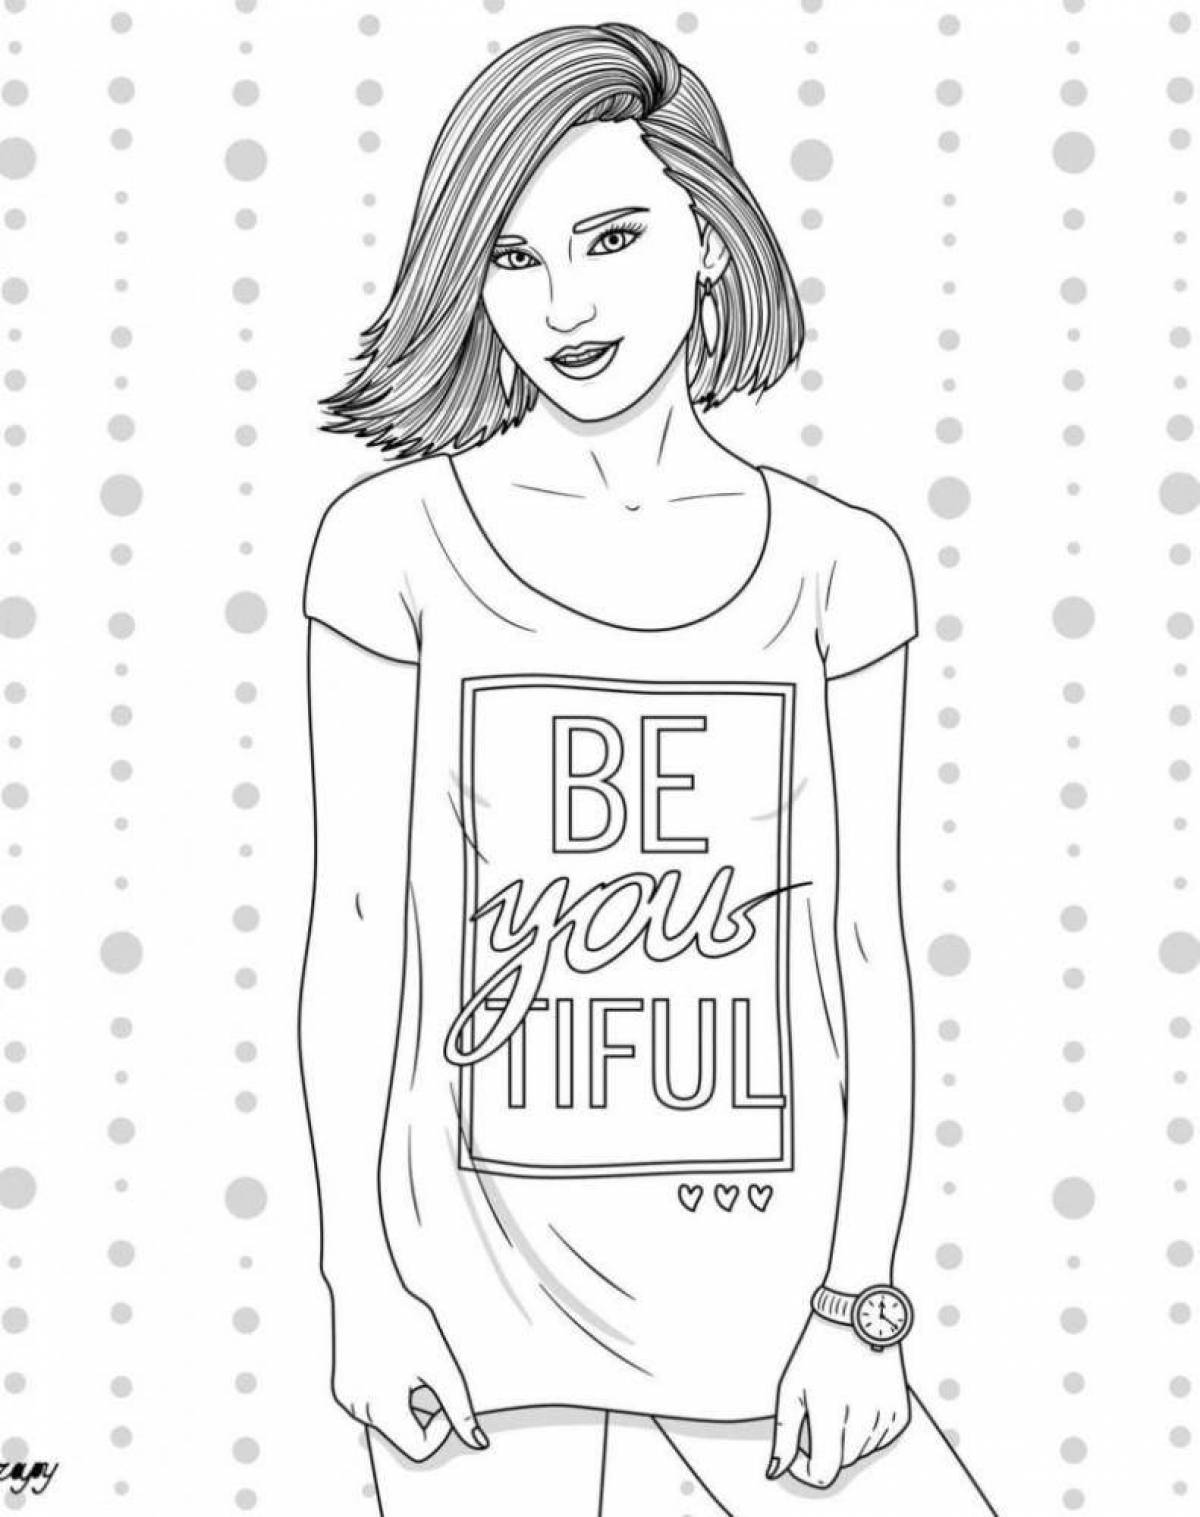 Coloring pages stylish girls - great